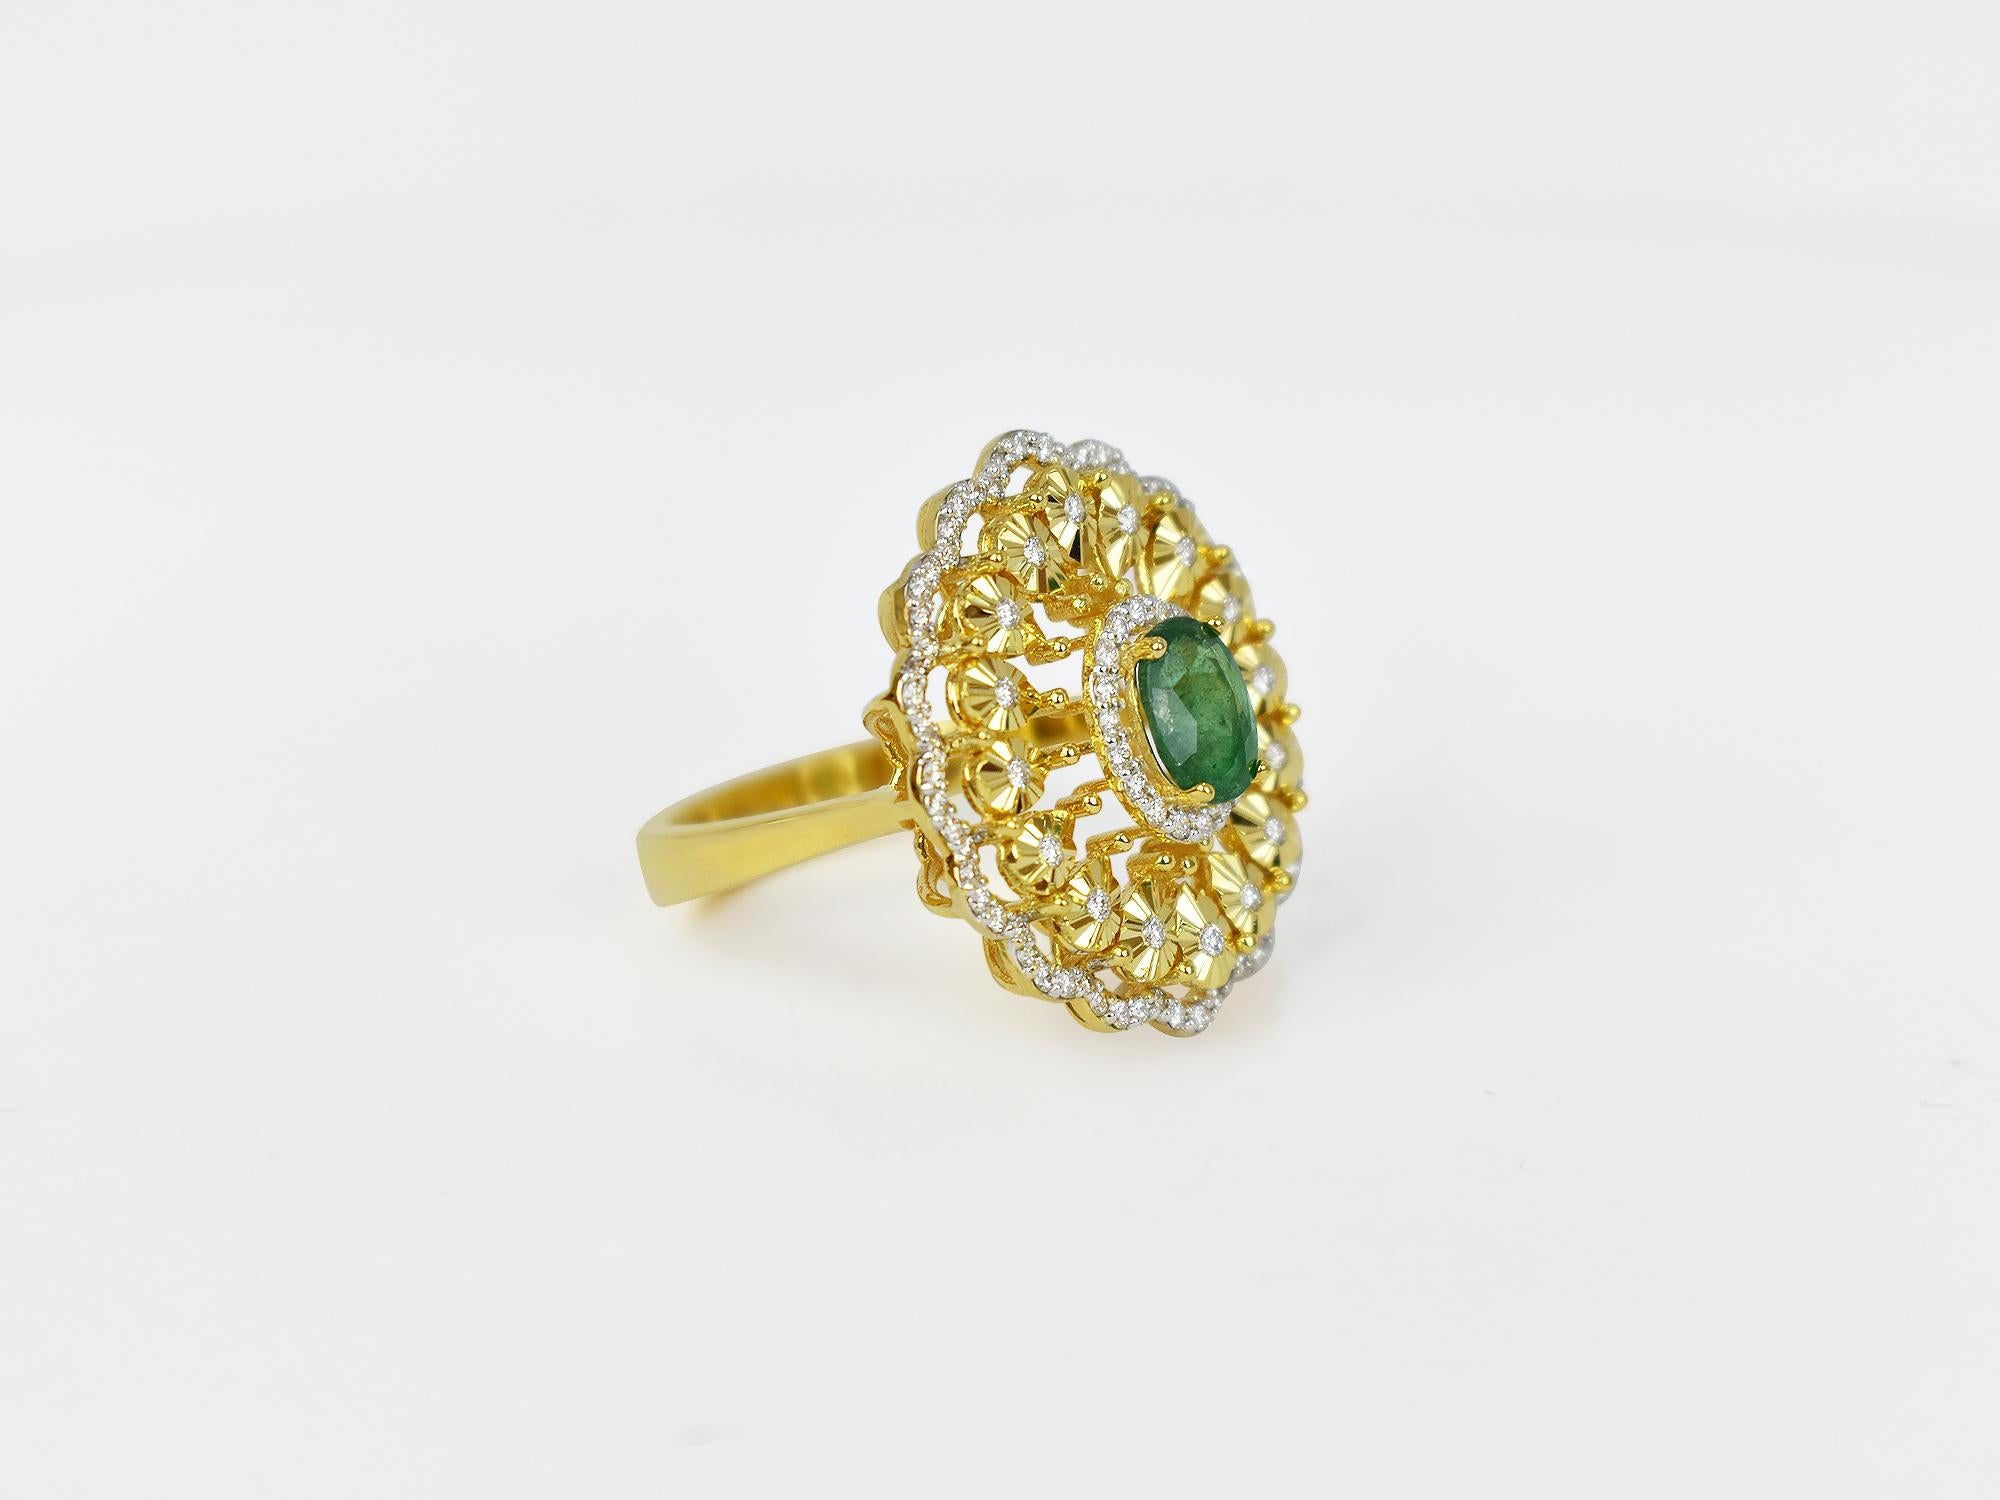 18k Ring Yello Gold Ring Diamond Ring  Emerald  Ring Emerald Oval Ring  Gold Fancy Ring
         This 18K solid white Gold Emerald / Diamond estate ring. The fine Quality gold finishing with oval shape Zambian emeralds & scintillating cluster pave